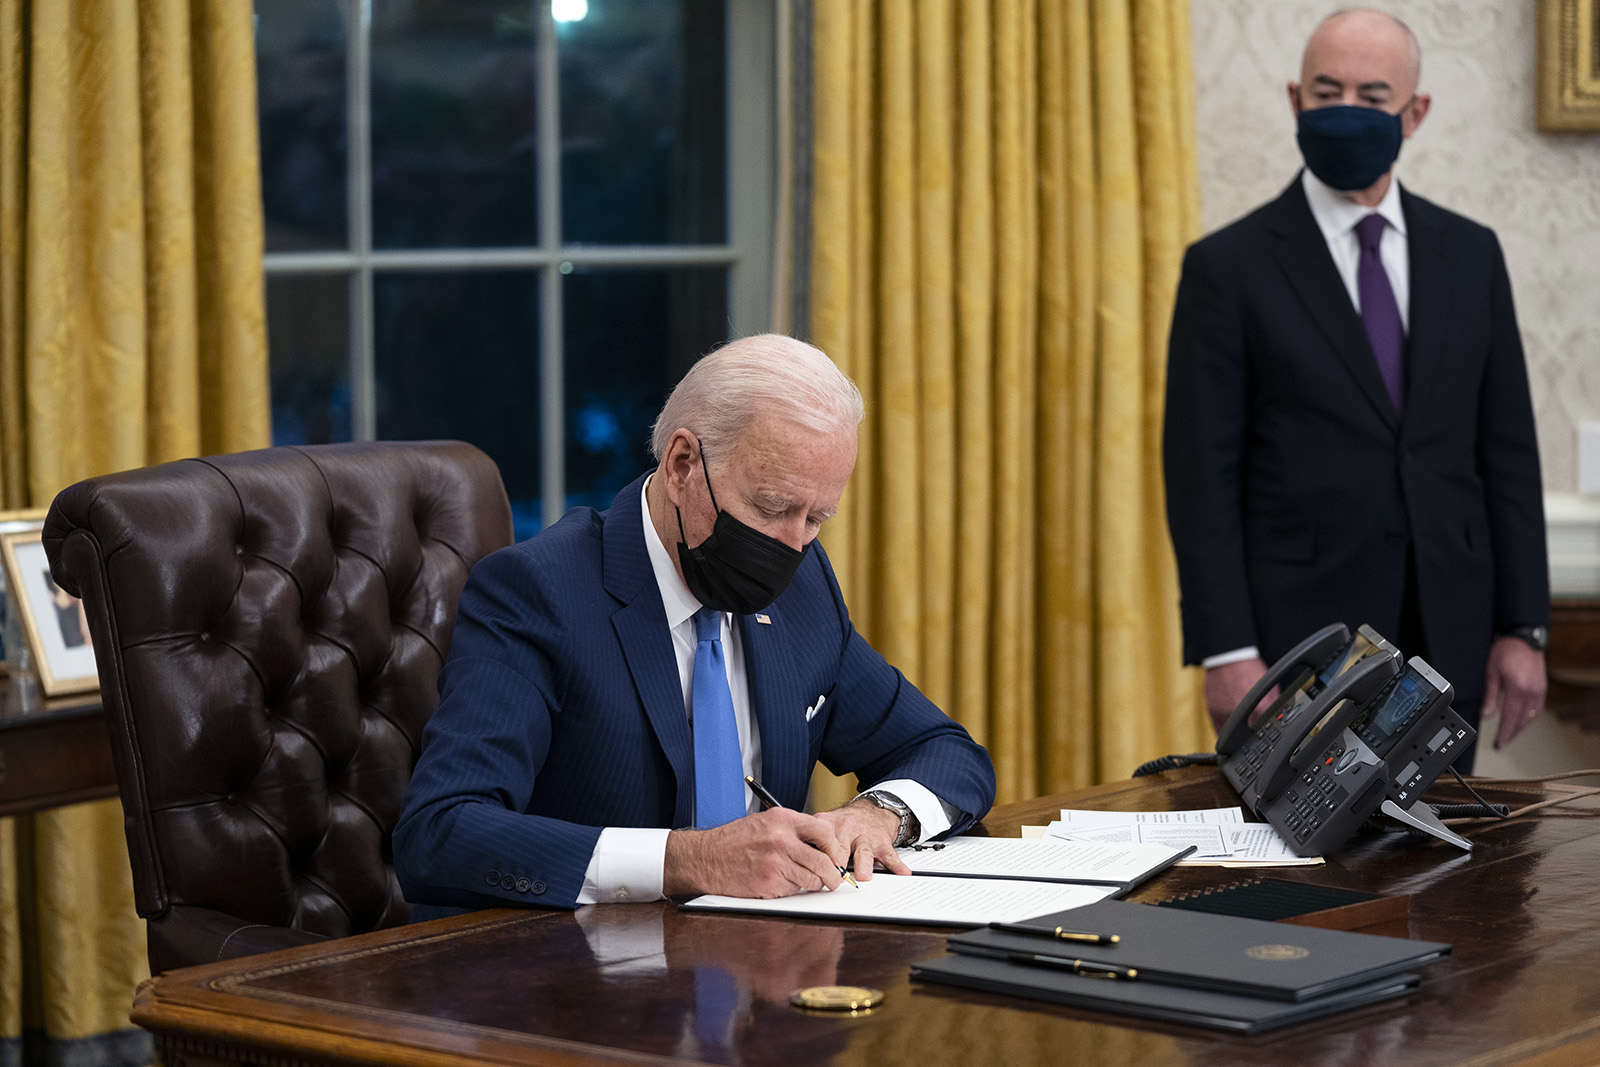 Secretary of Homeland Security Alejandro Mayorkas looks on as President Joe Biden signs an executive order on immigration, in the Oval Office of the White House, Tuesday, Feb. 2, 2021, in Washington. (AP Photo/Evan Vucci)